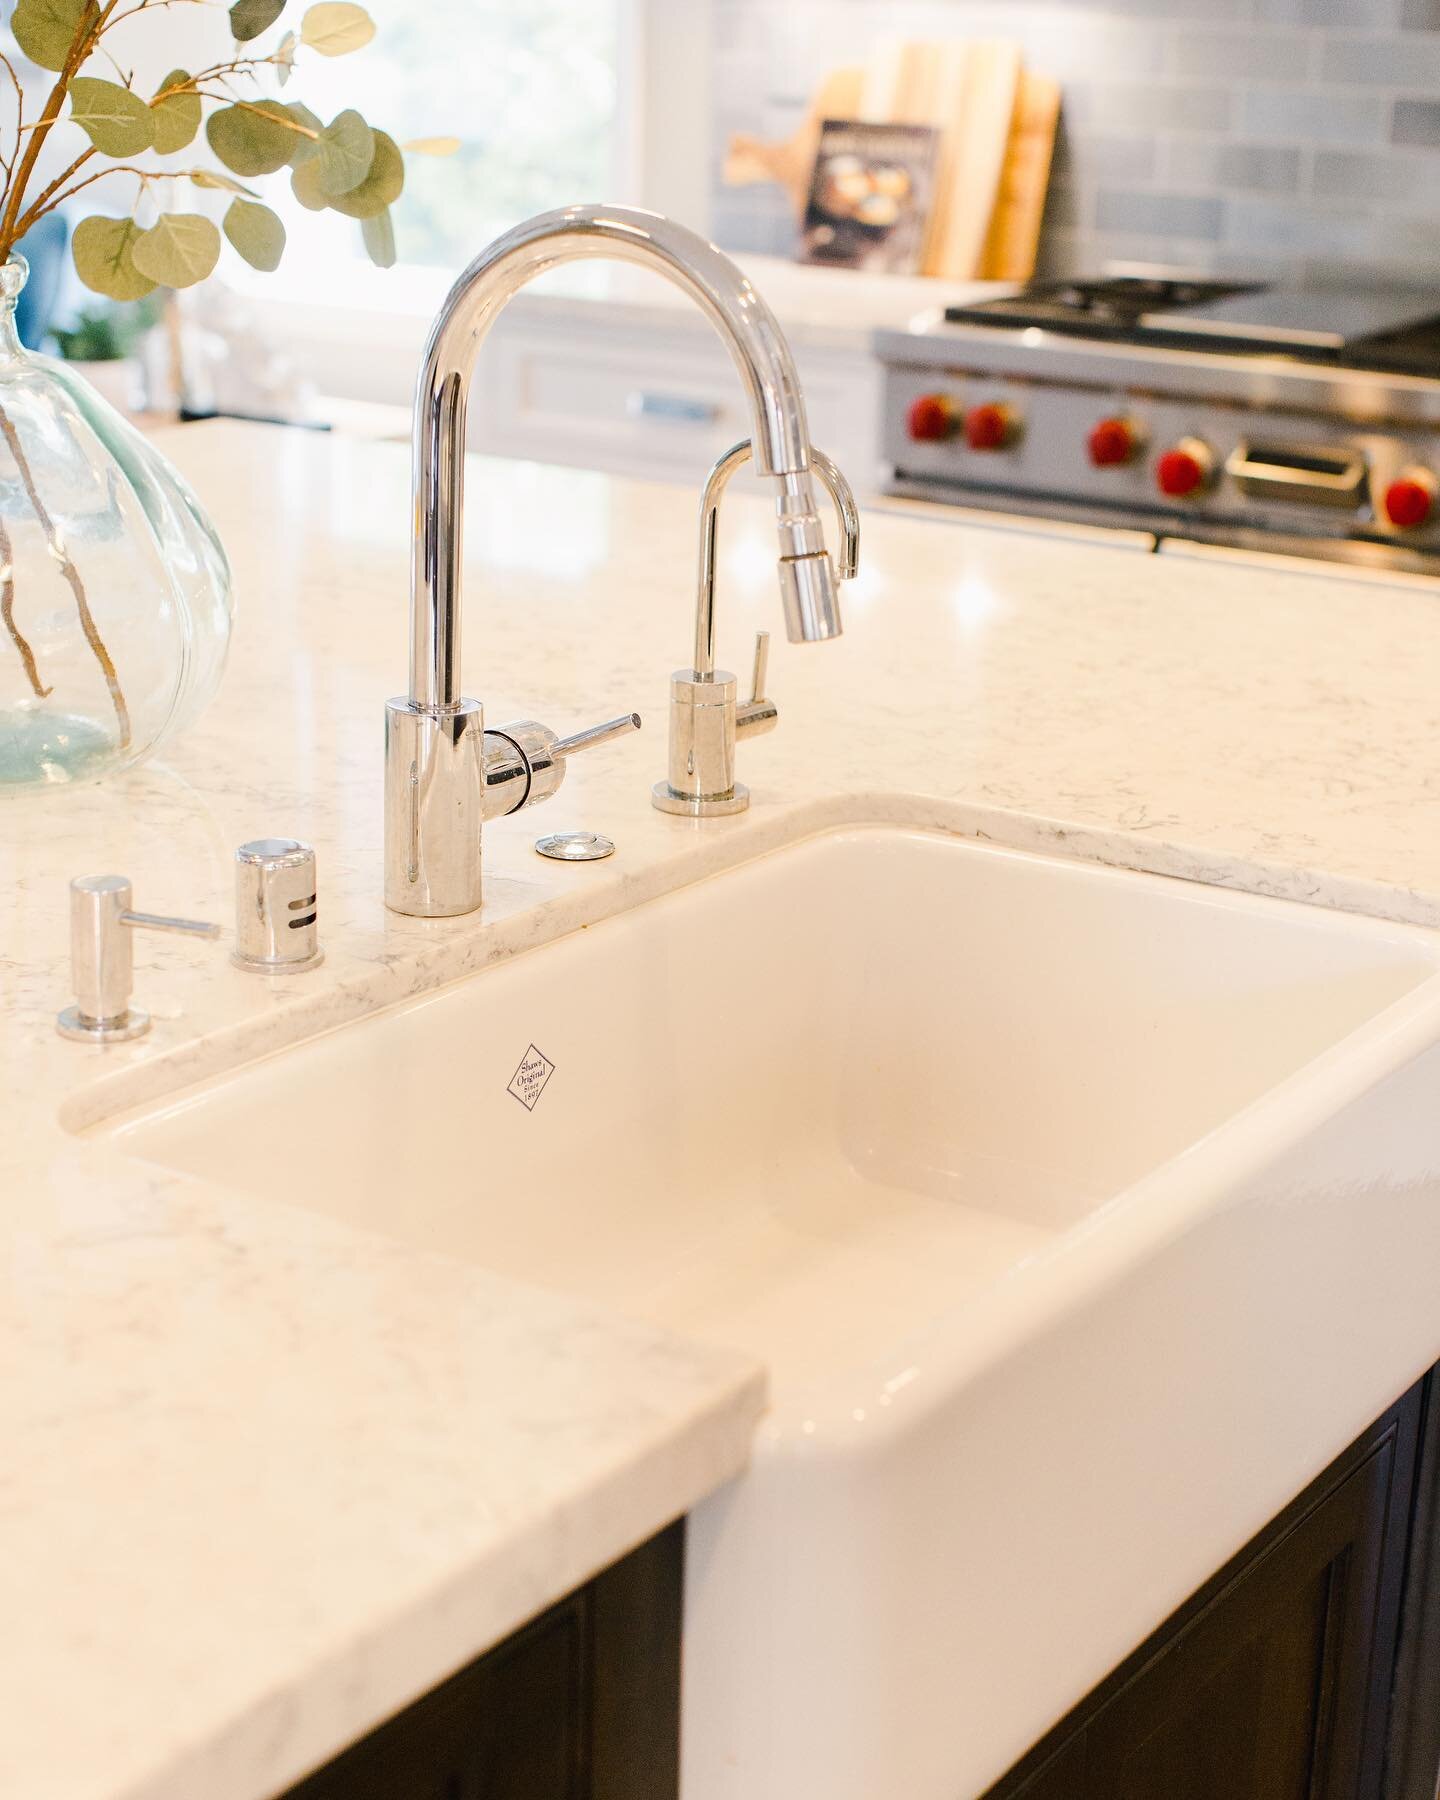 What is it about a @shawsofdarwenuk sink that&rsquo;s so charming? Maybe the English roots and definitely the apron front!  Here we paired the sink with a crisp chrome faucet, a mix of white and dark wood cabinetry, and a silestone quartz countertop 